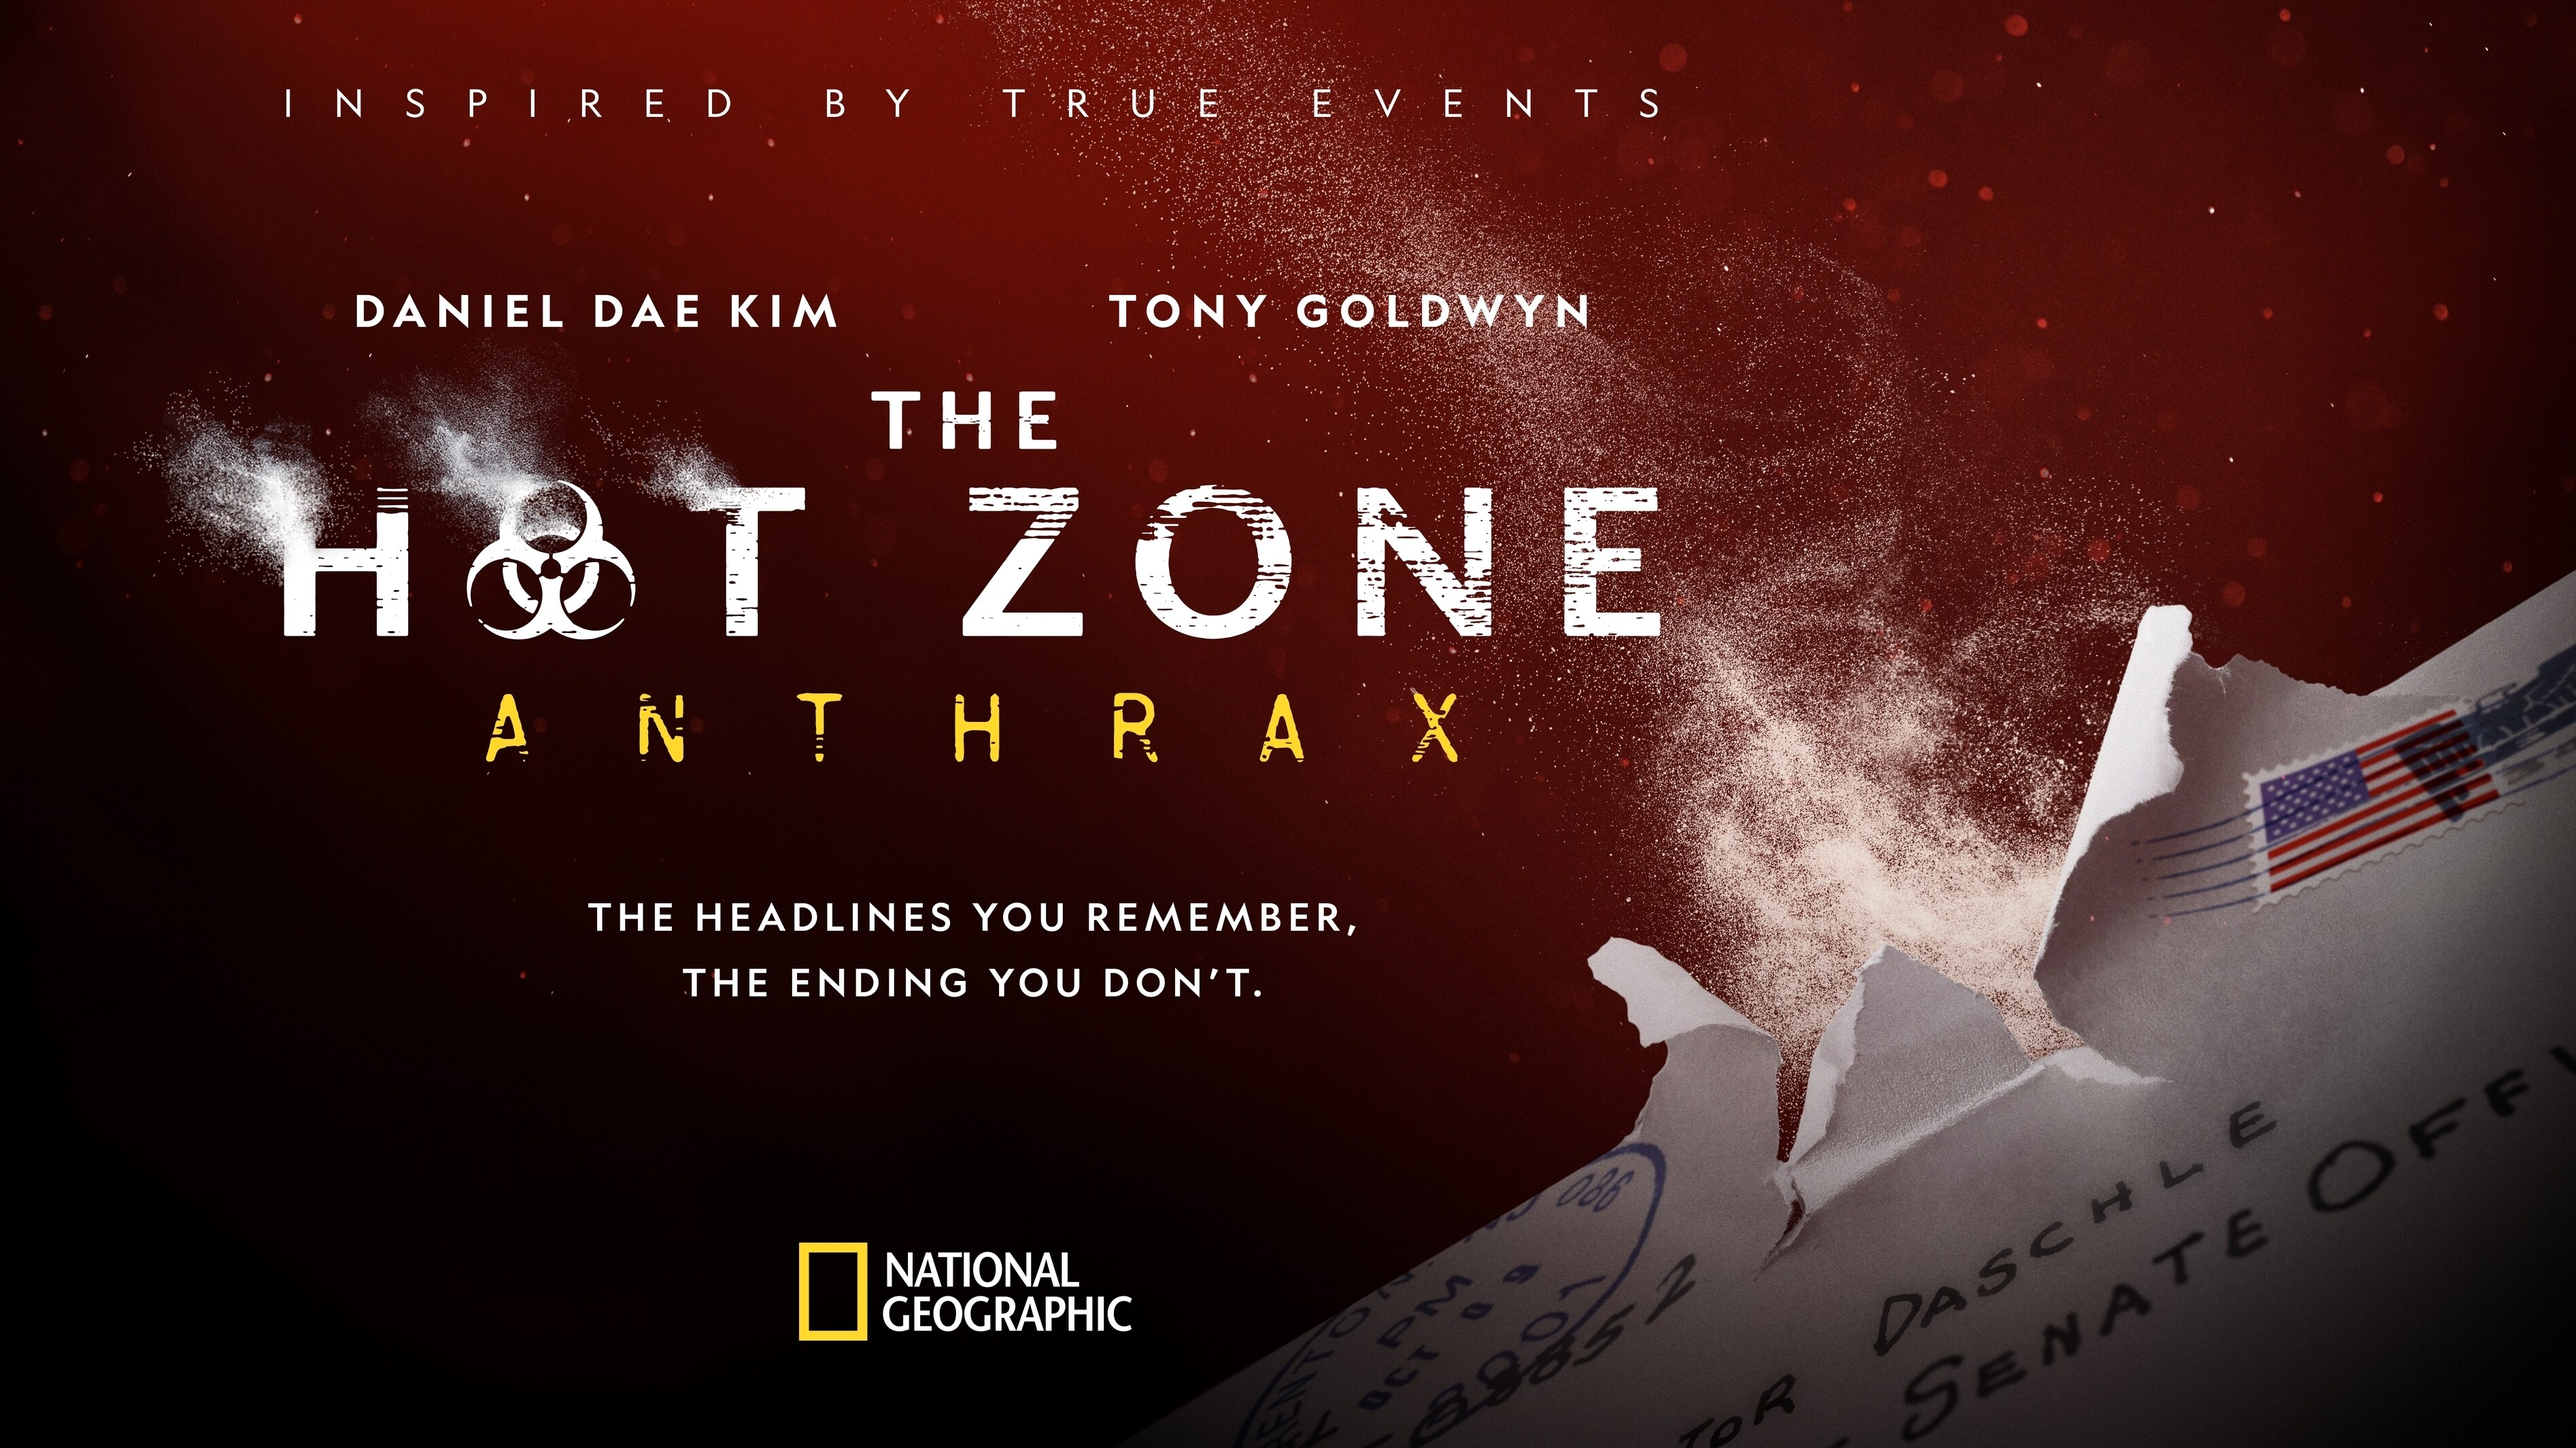 JUST WEEKS AFTER 9/11, TERROR STRUCK A SECOND TIME. NATIONAL GEOGRAPHIC UNVEILS THE TRAILER FOR  SCIENTIFIC THRILLER THE HOT ZONE: ANTHRAX,  FEATURING CO-STARS DANIEL DAE KIM AND TONY GOLDWYN